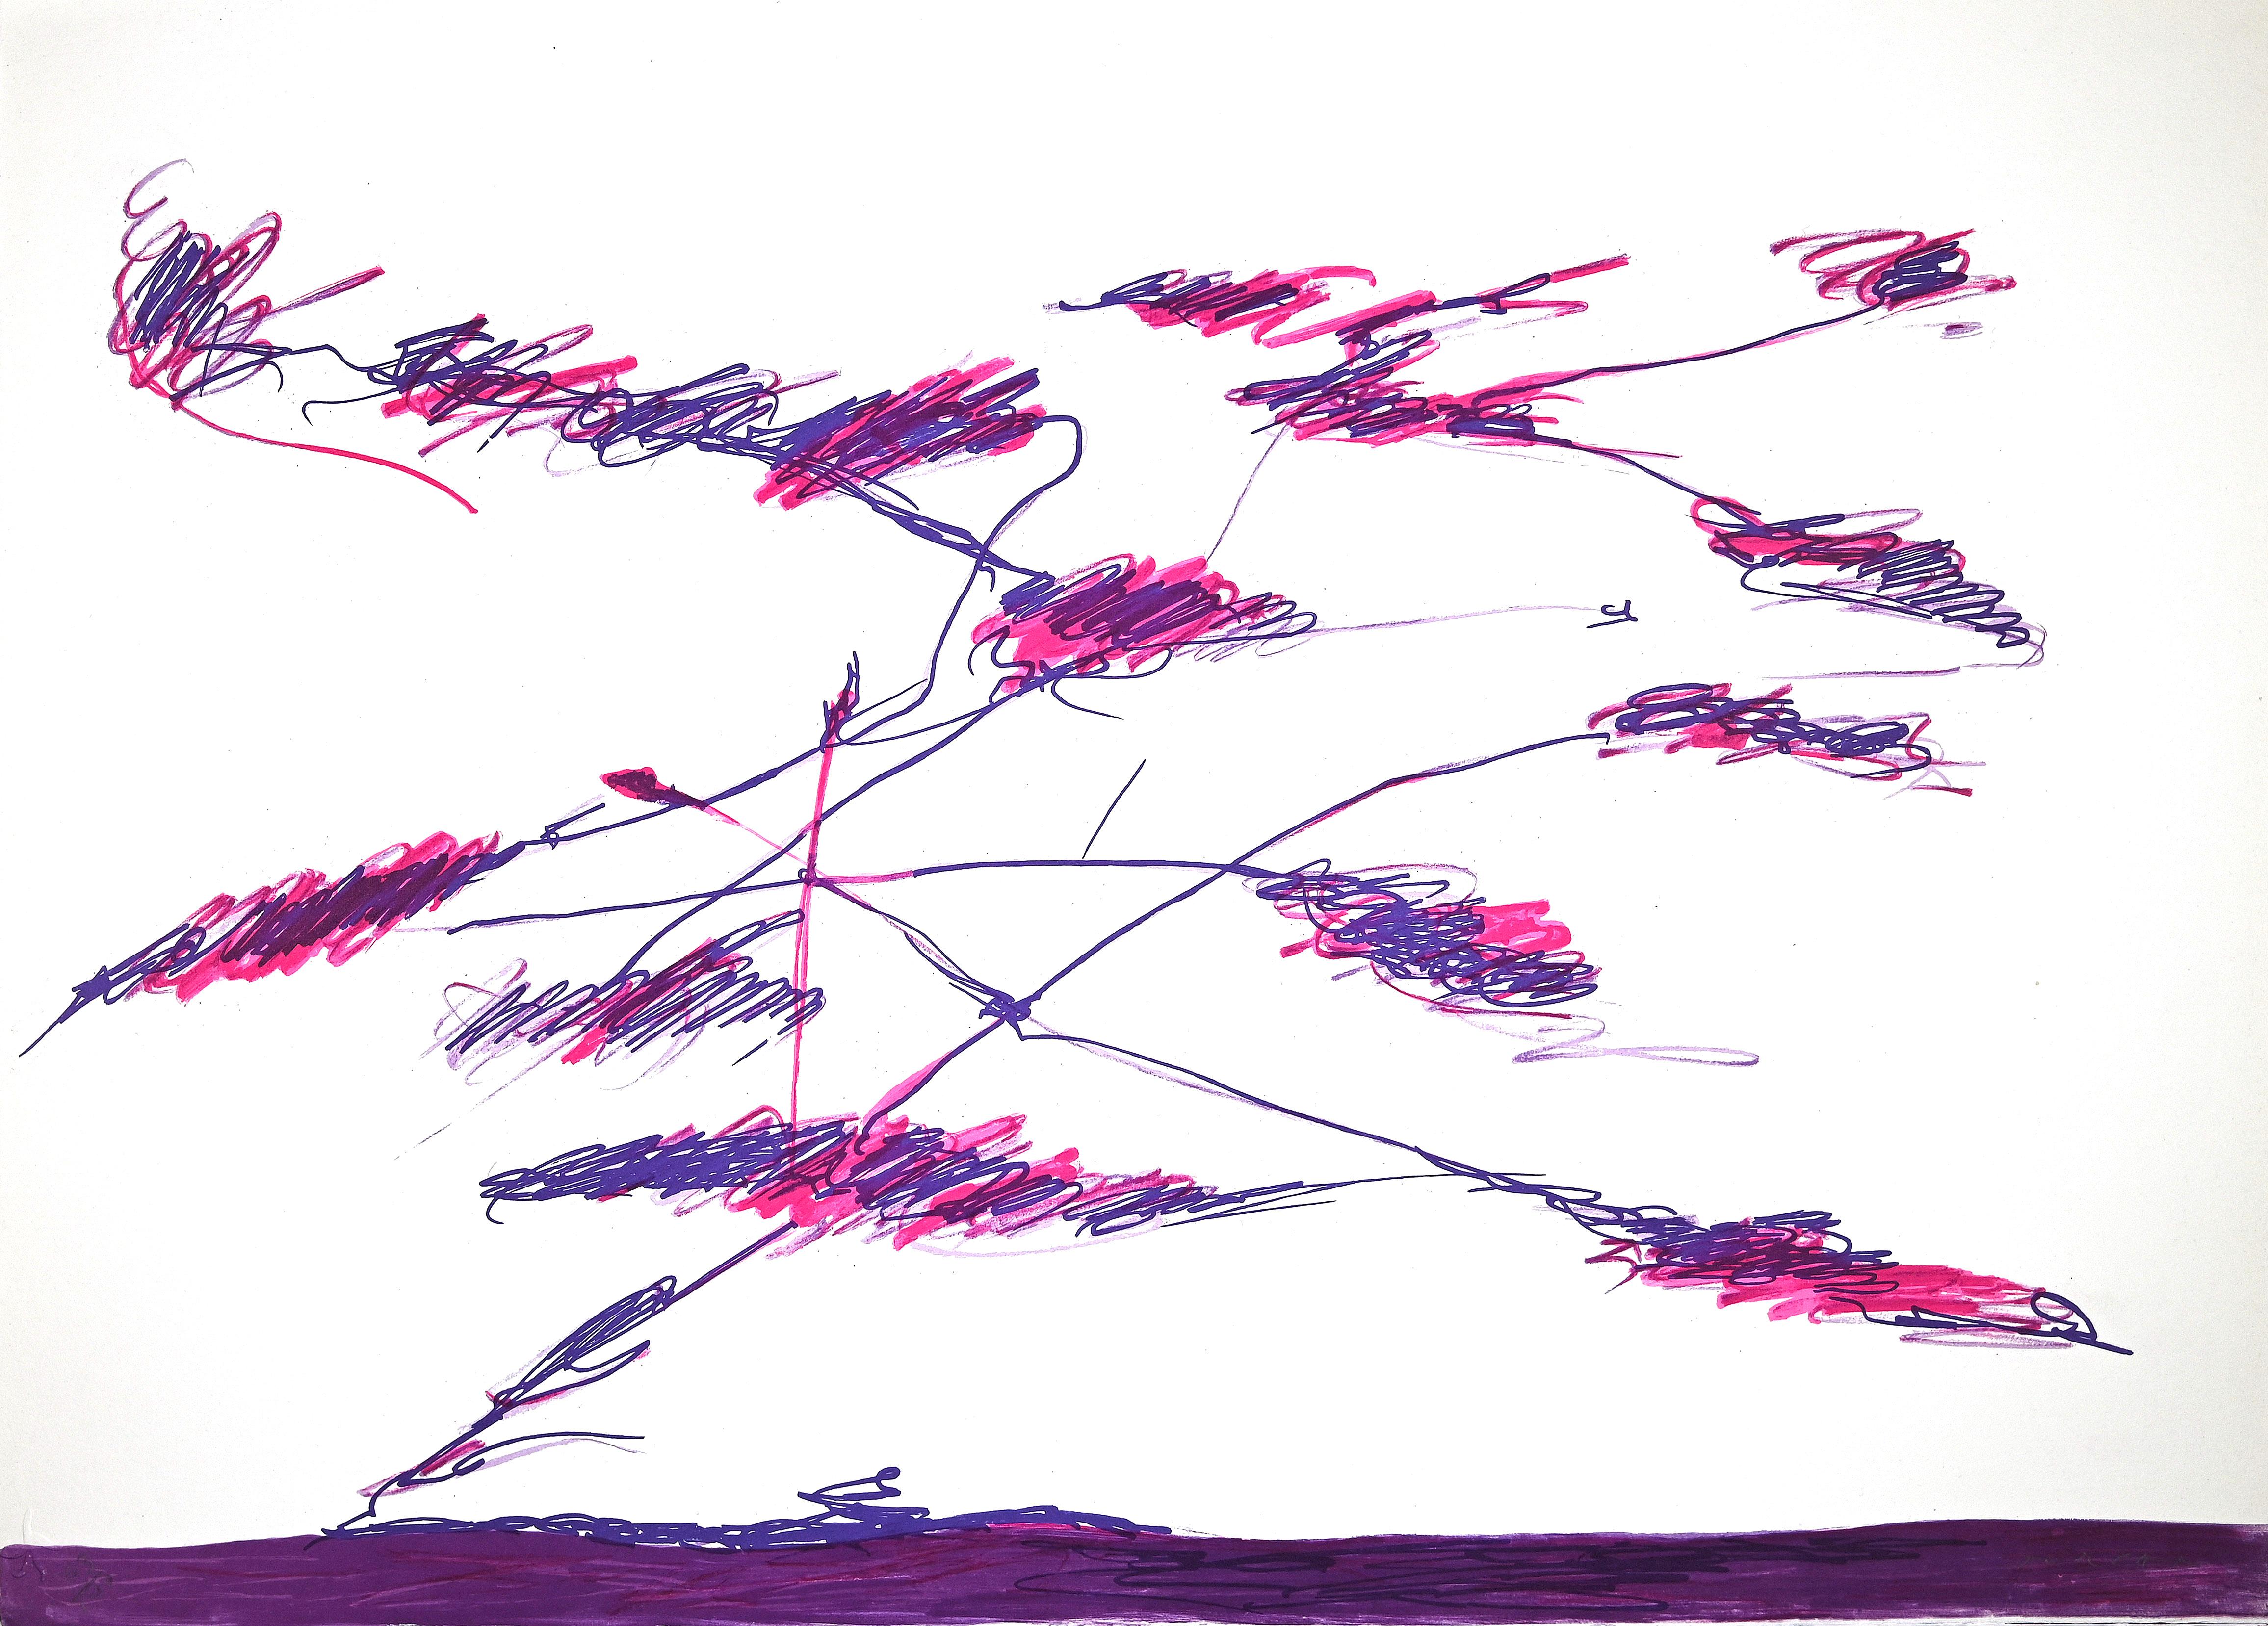 Abstract Violet Composition is a colored screen print realized by the contemporary artist Giulio Turcato.

Hand-signed in pencil on the lower right.

Numbered on the lower left margin, edition of 100 copies.

Authenticity label of La Nuova Foglio on